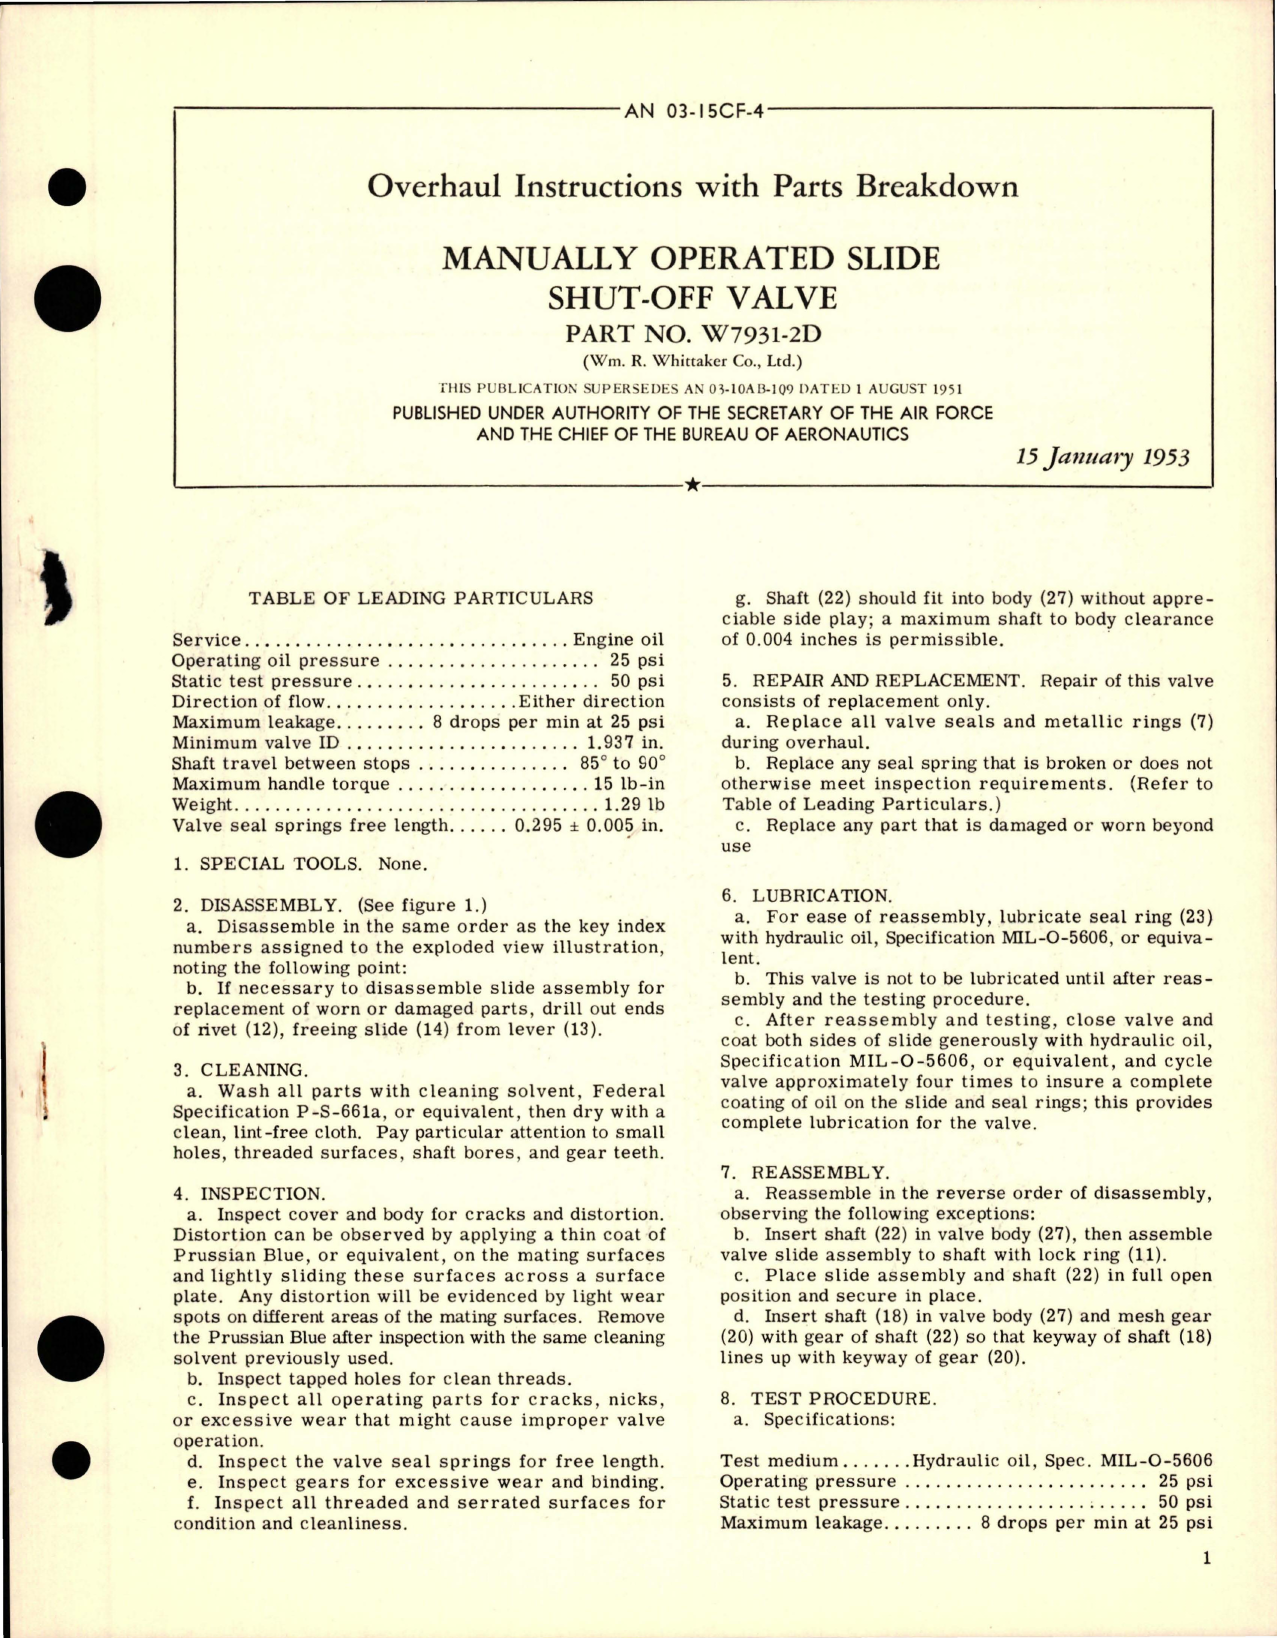 Sample page 1 from AirCorps Library document: Overhaul Instructions with Parts Breakdown for Manually Operated Slide Shut-Off Valve - Part W7931-2D